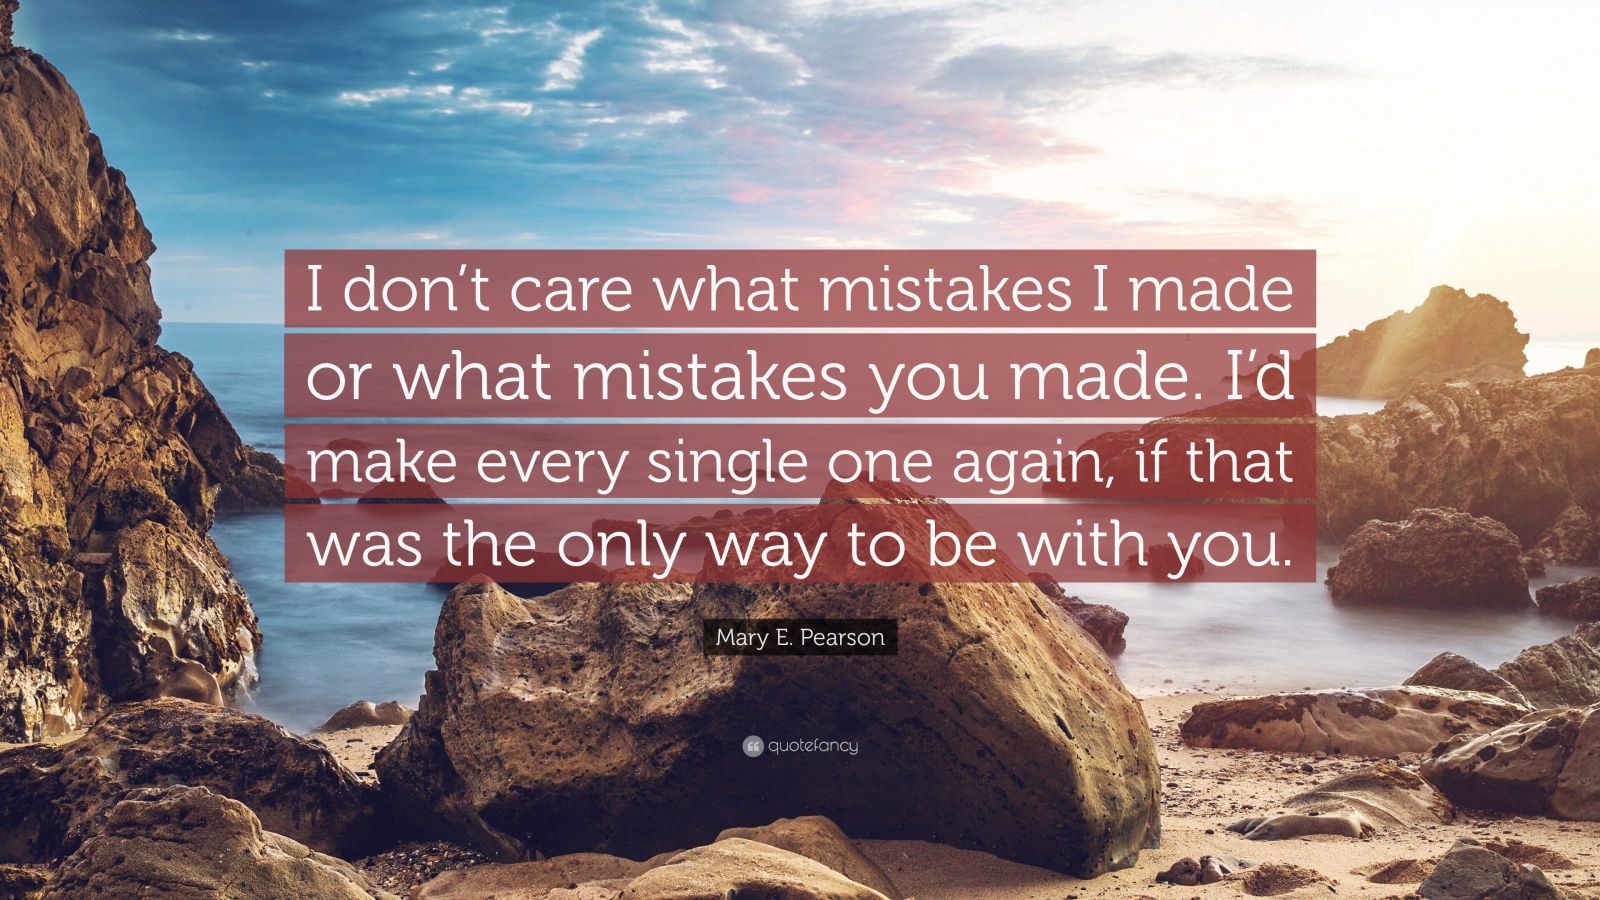 Mary E. Pearson Quote: “I don’t care what mistakes I made or what ...